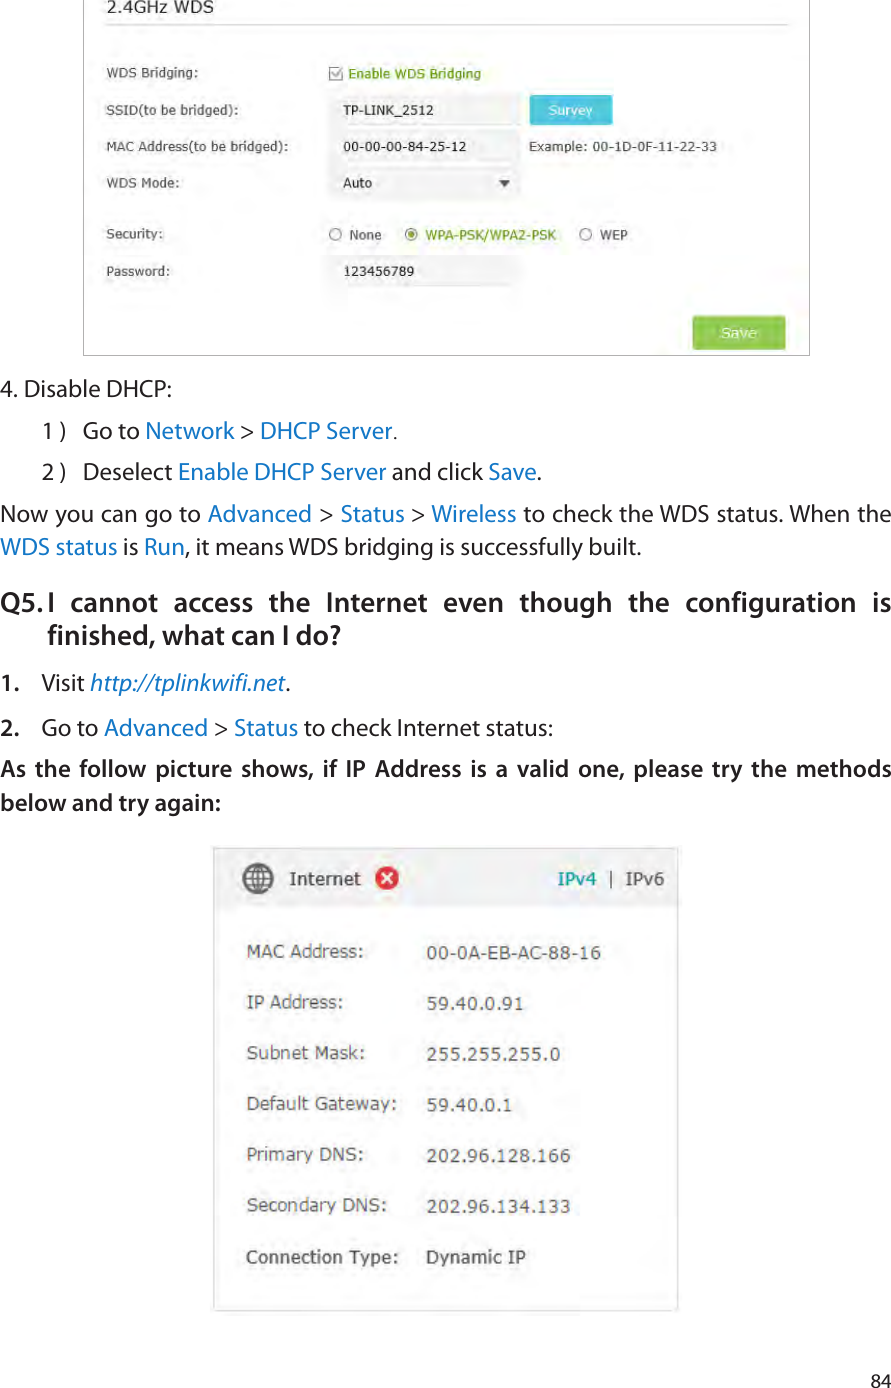 844. Disable DHCP:1 )  Go to Network &gt; DHCP Server.2 )  Deselect Enable DHCP Server and click Save.Now you can go to Advanced &gt; Status &gt; Wireless to check the WDS status. When the WDS status is Run, it means WDS bridging is successfully built.Q5. I cannot access the Internet even though the configuration is finished, what can I do?1.  Visit http://tplinkwifi.net.2.  Go to Advanced &gt; Status to check Internet status:As the follow picture shows, if IP Address is a valid one, please try the methods below and try again: